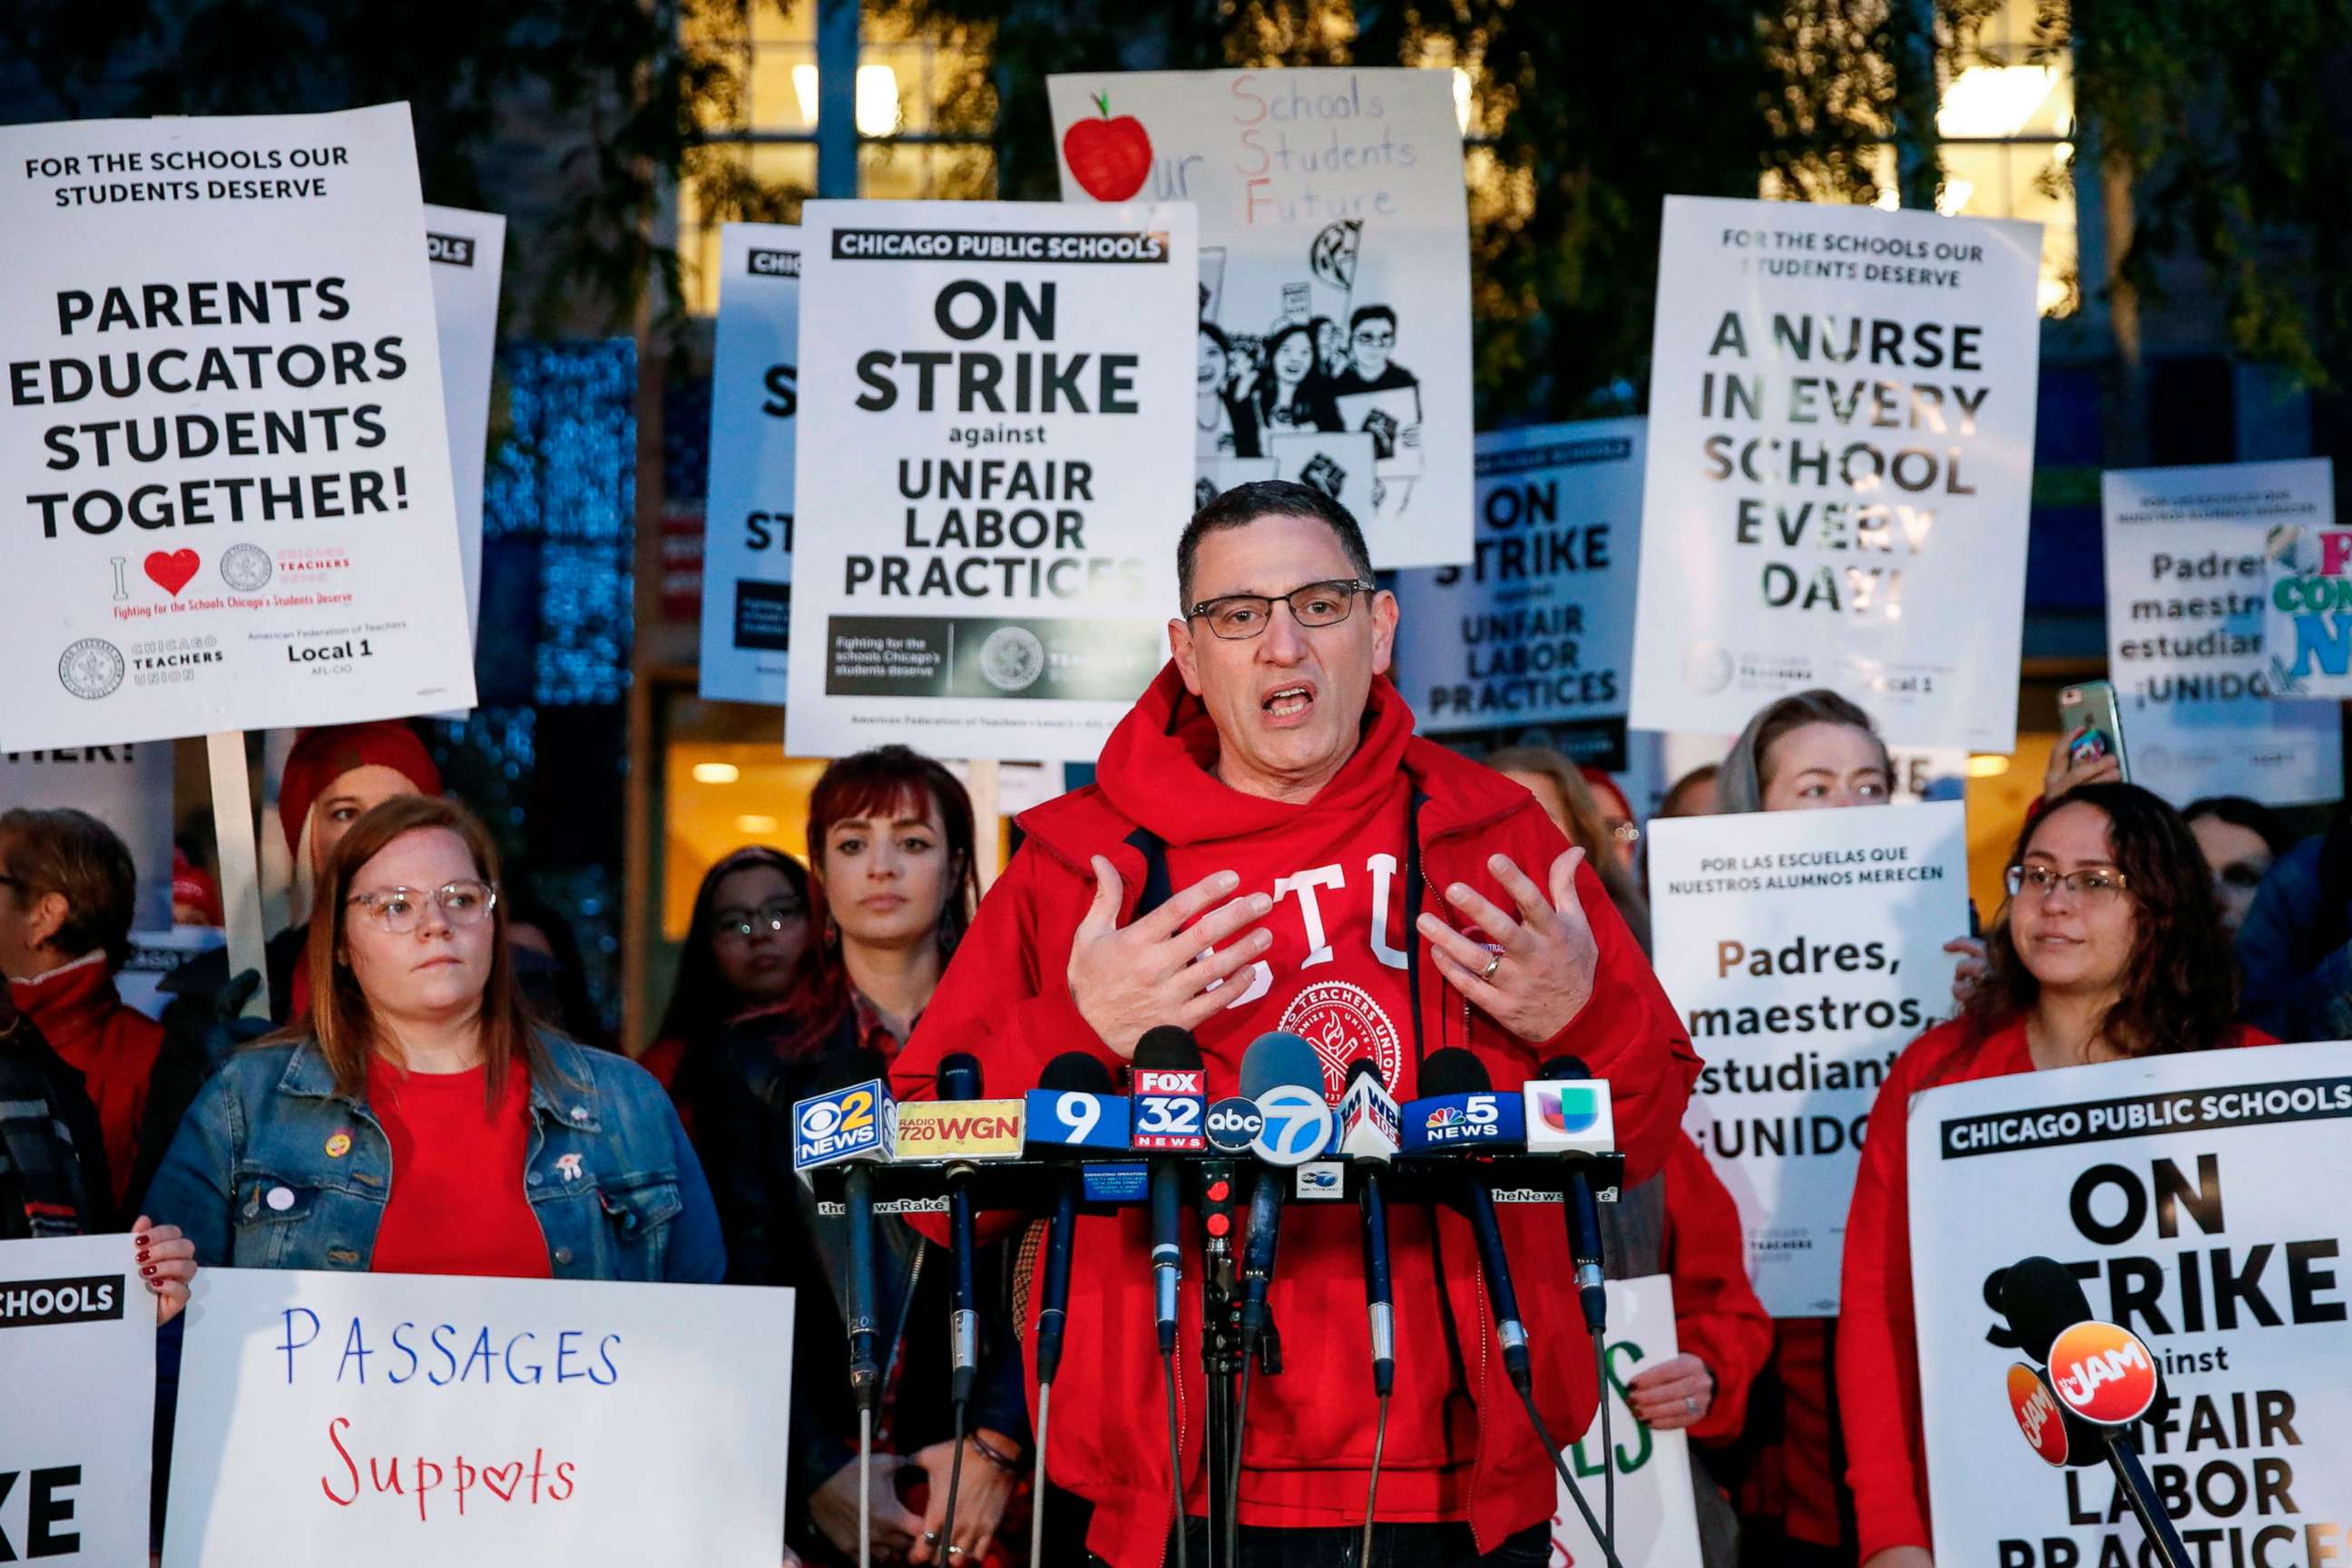 PHOTO: Chicago Teachers Union President Jesse Sharkey speaks outside Peirce Elementary School on the first day of a strike, Oct. 17, 2019 in Chicago.